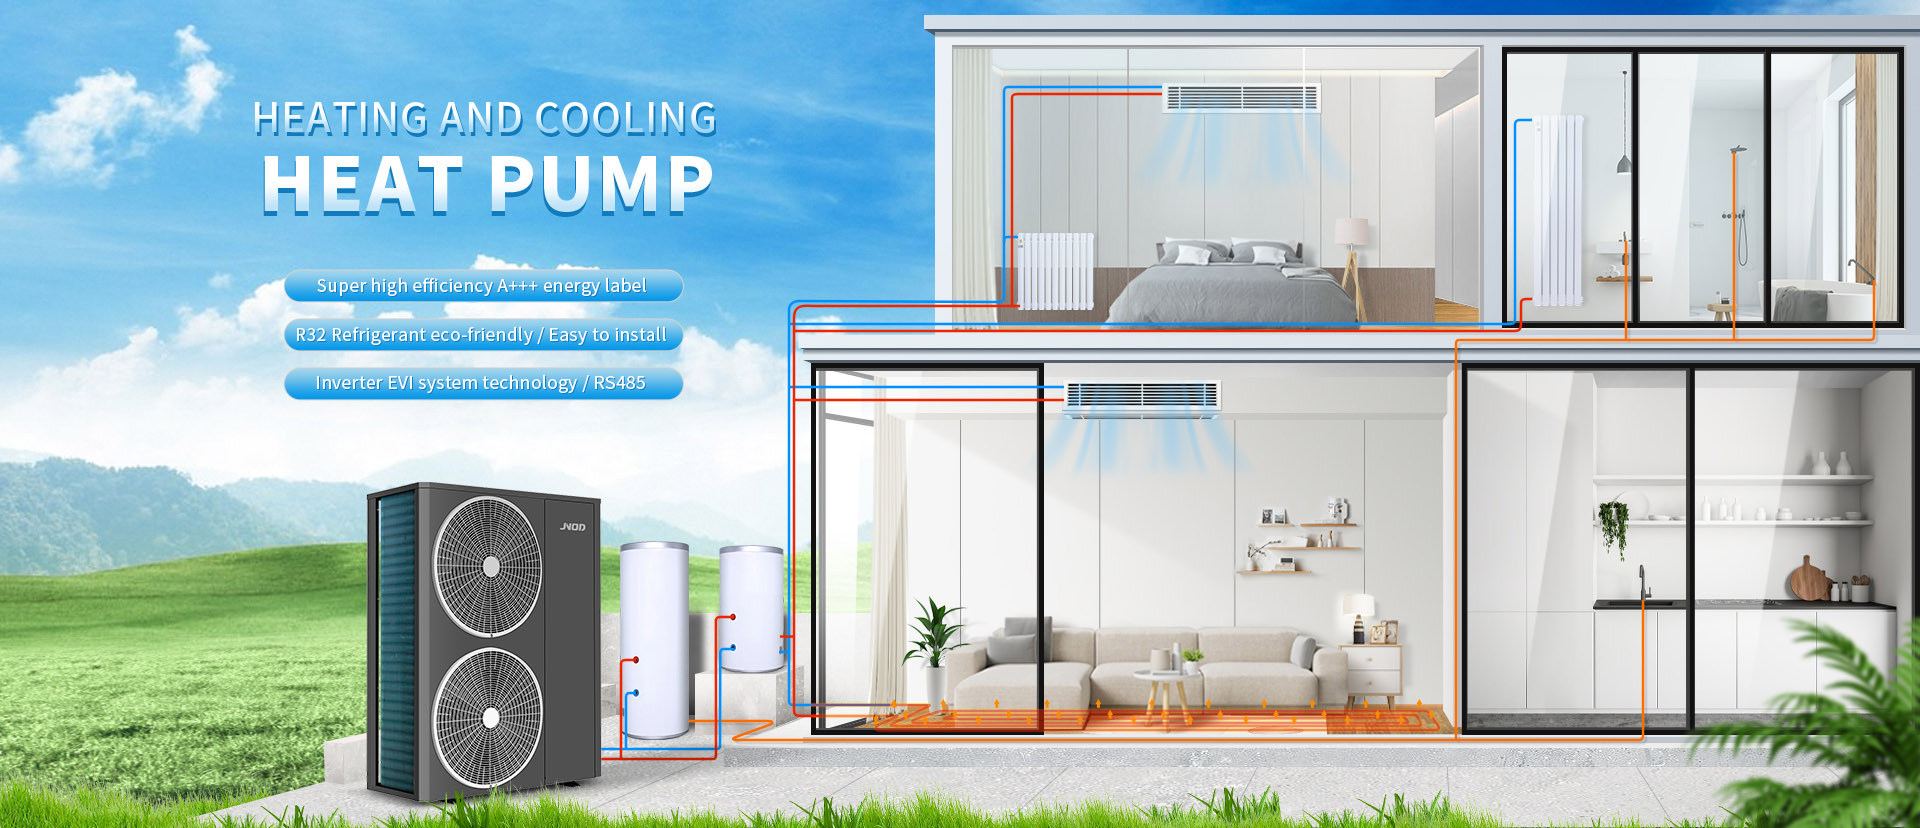 Home Heating And Cooling Heat Pump